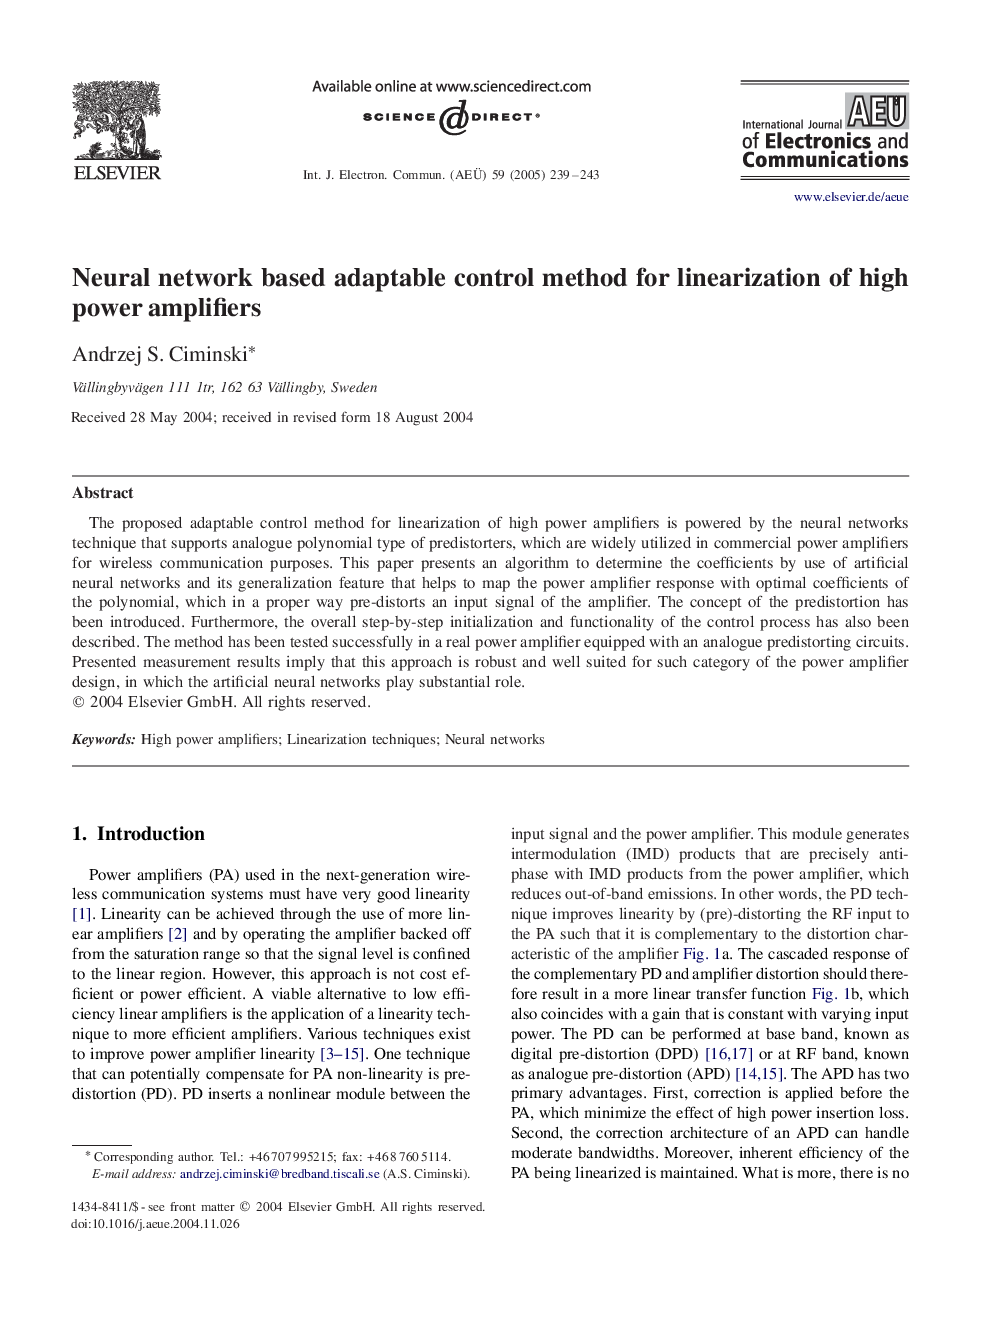 Neural network based adaptable control method for linearization of high power amplifiers